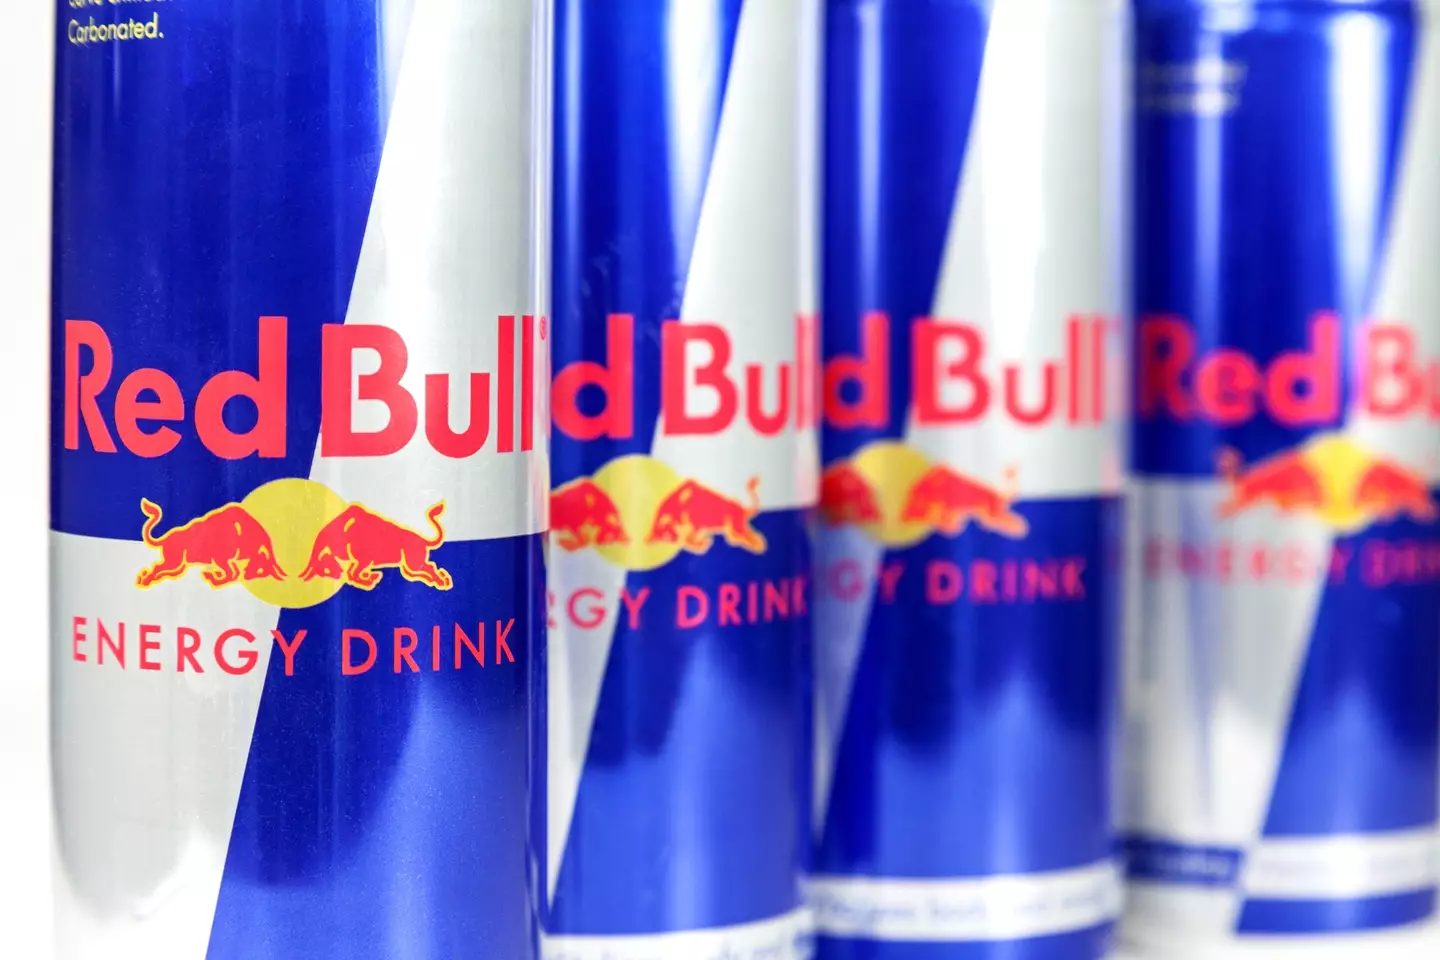 Could an ingredient in Red Bull be the secret to longer life?